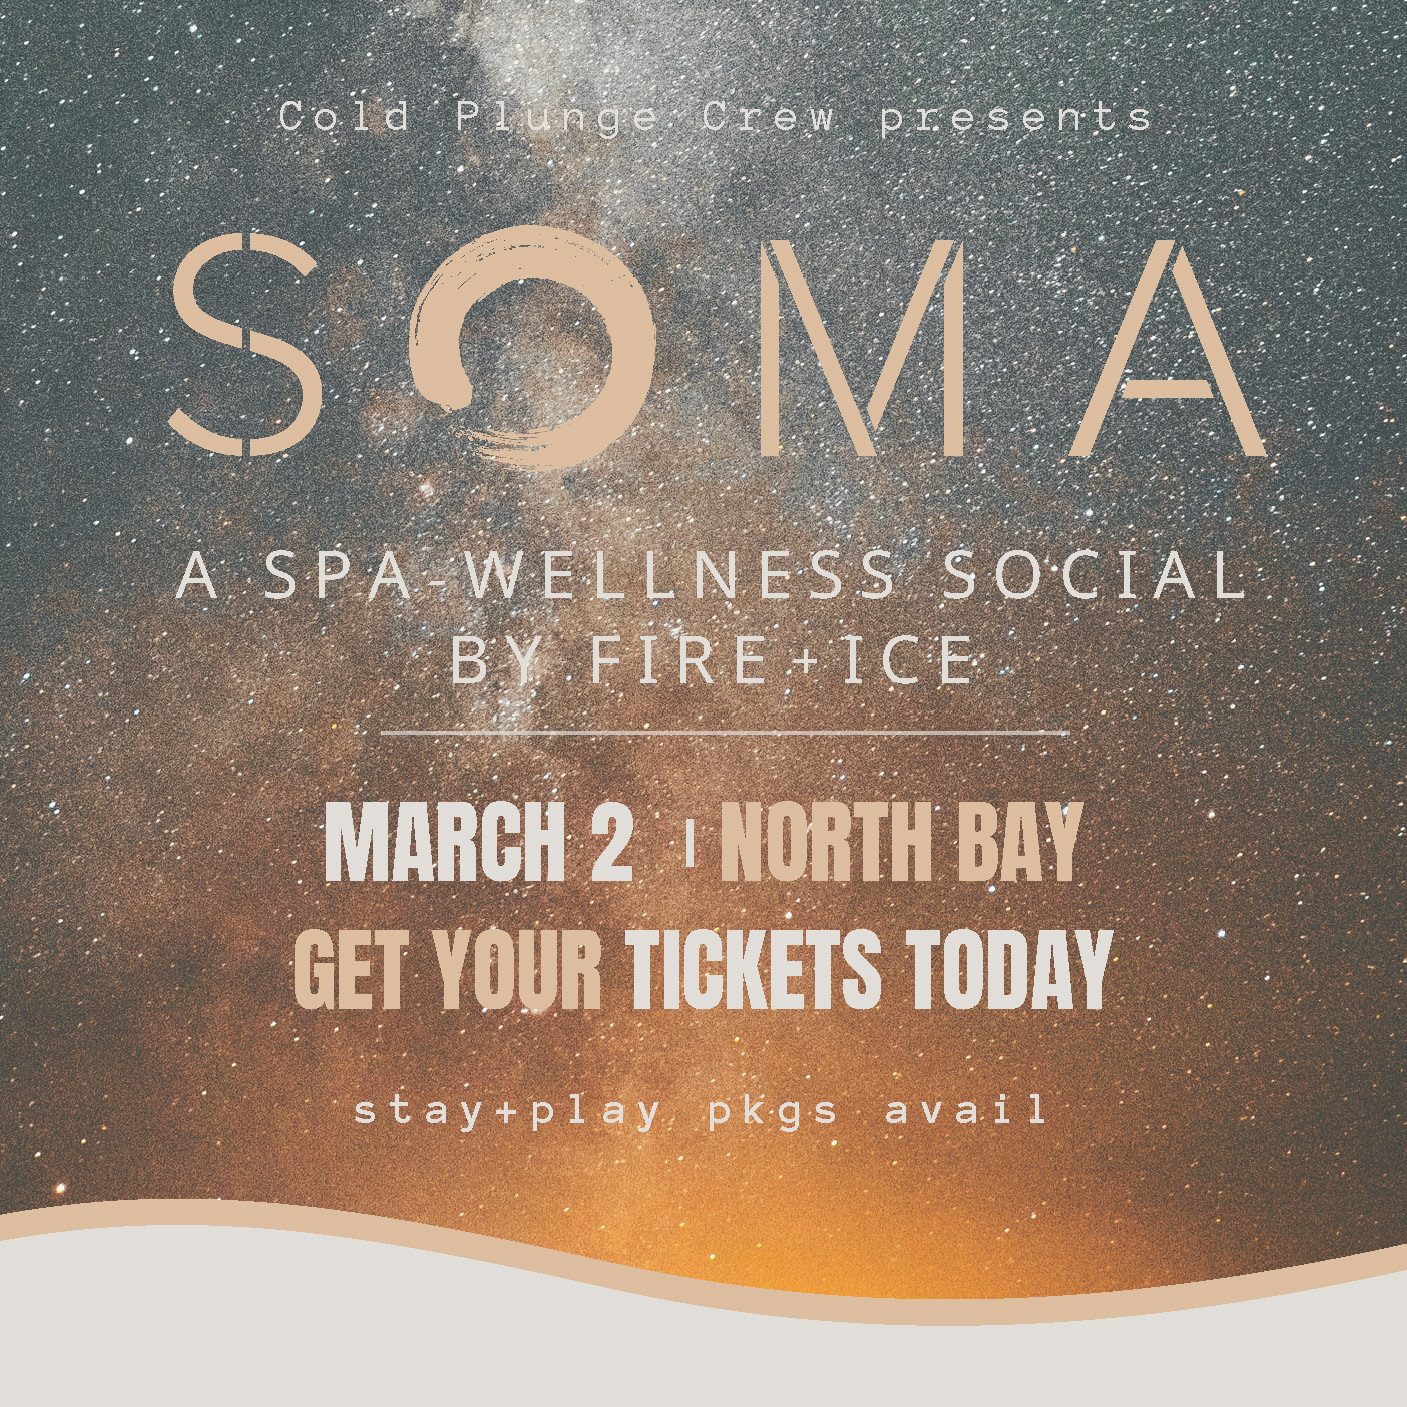 SOMA - A SPA wellness social by fire + ice | March 2, North Bay | Get your tickets today